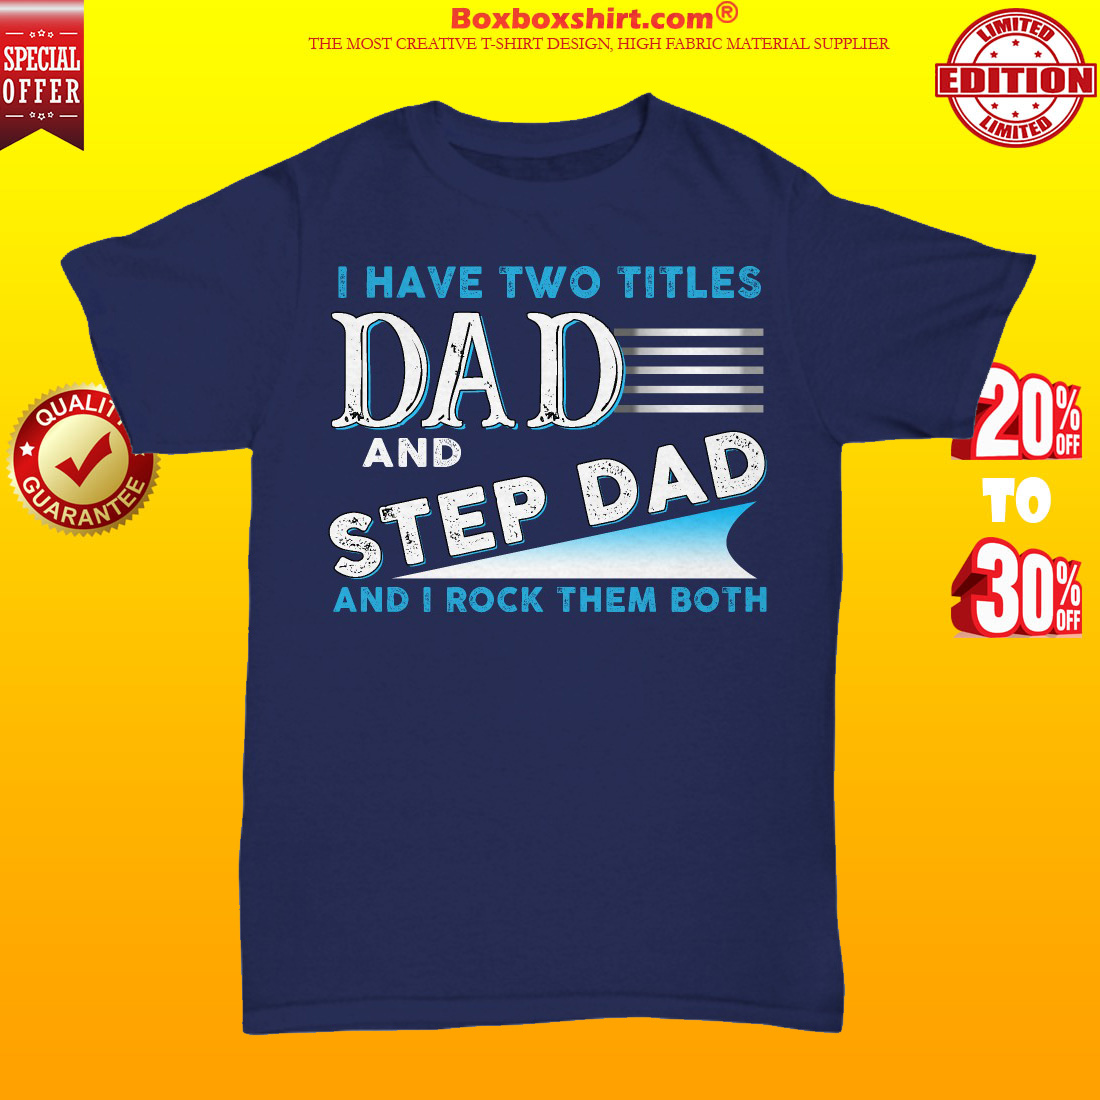 I have two titles dad and step dad and I rock them both unisex tee shirt